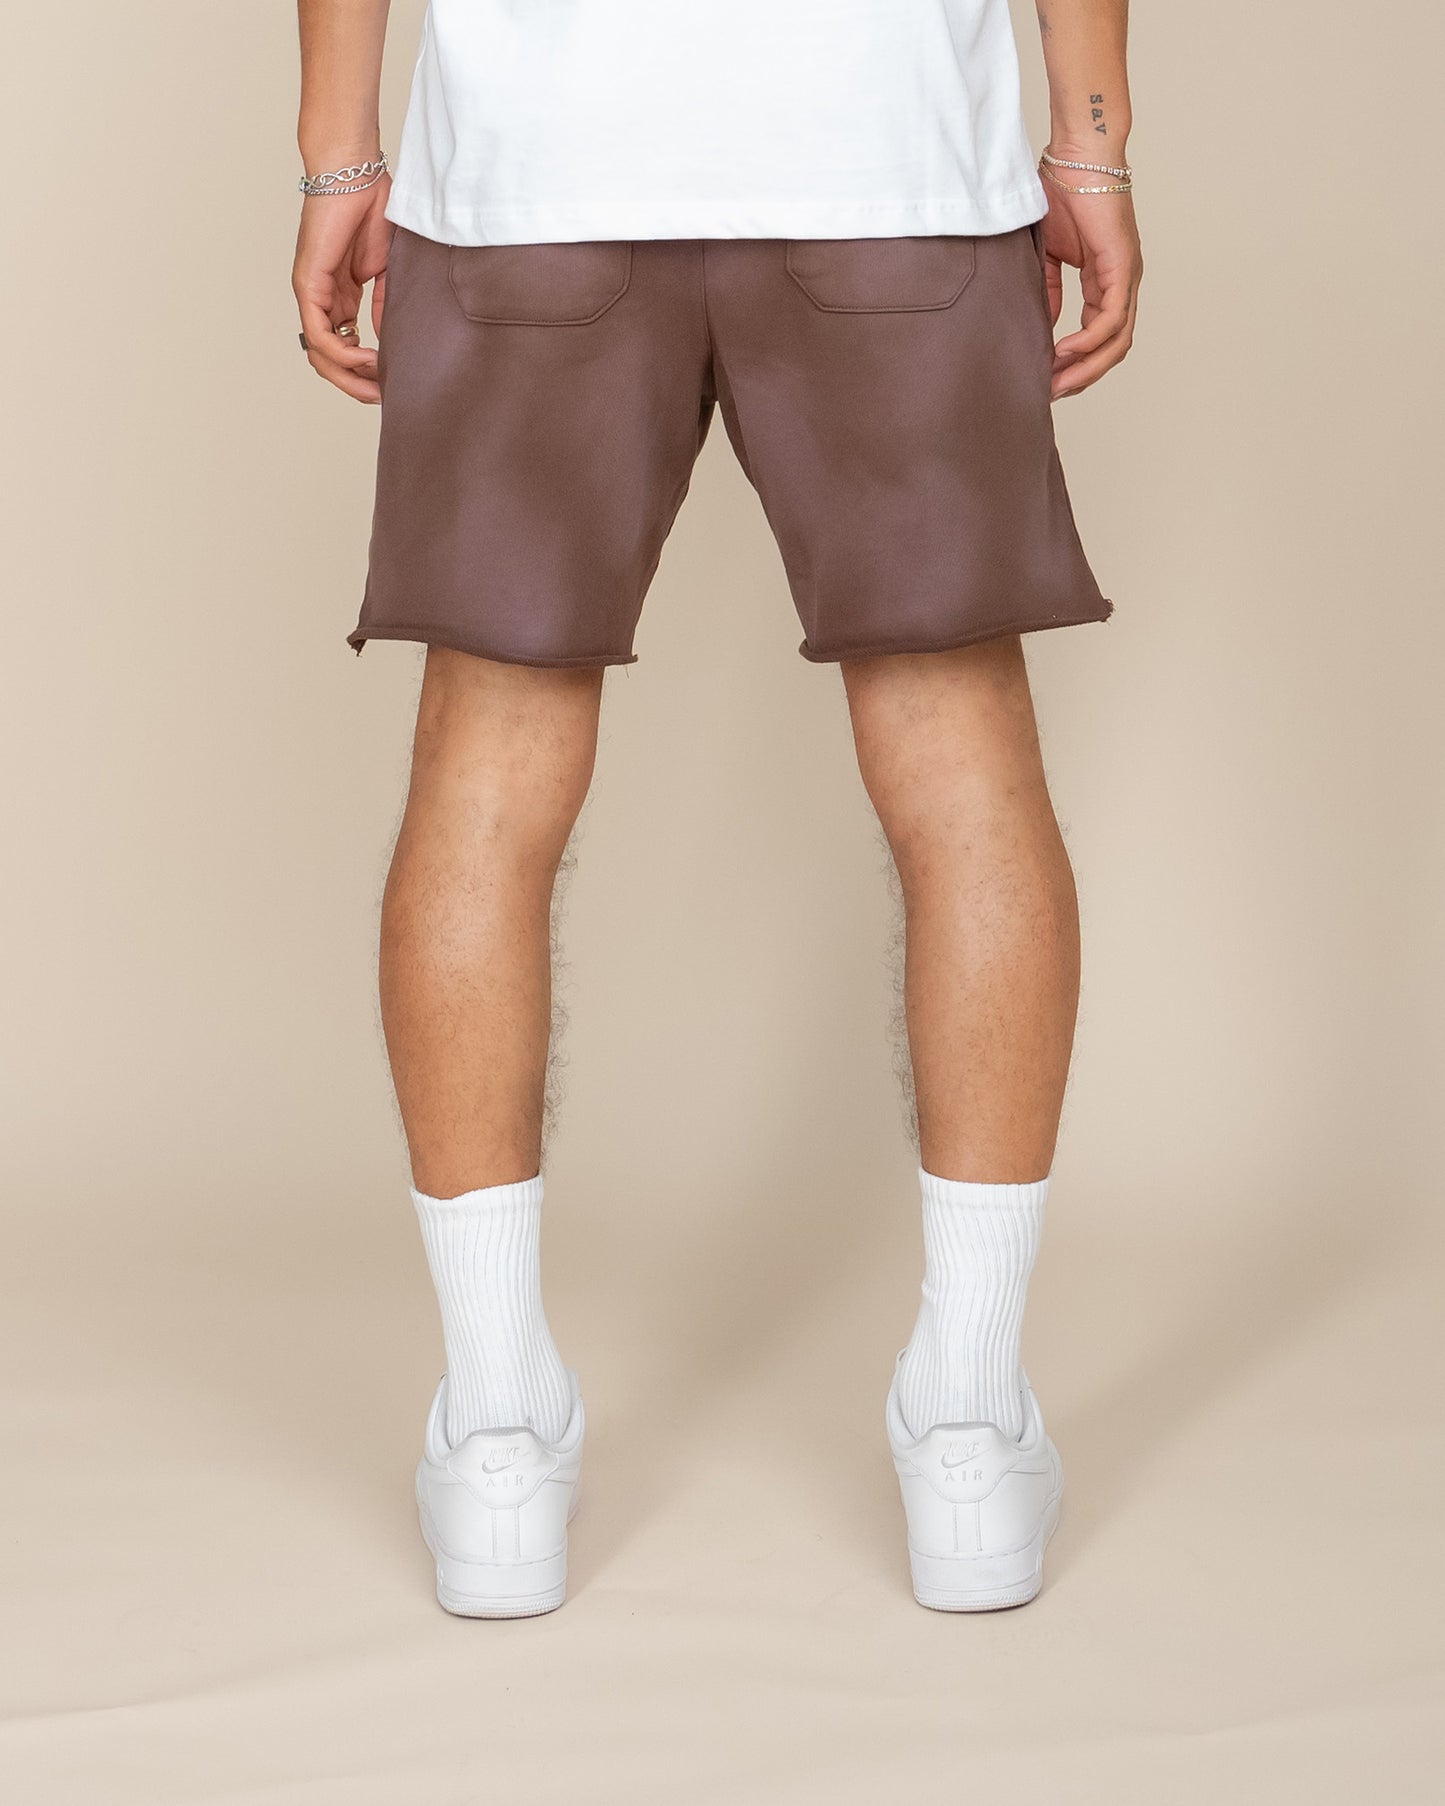 EPTM SUN FADED SHORTS - BROWN